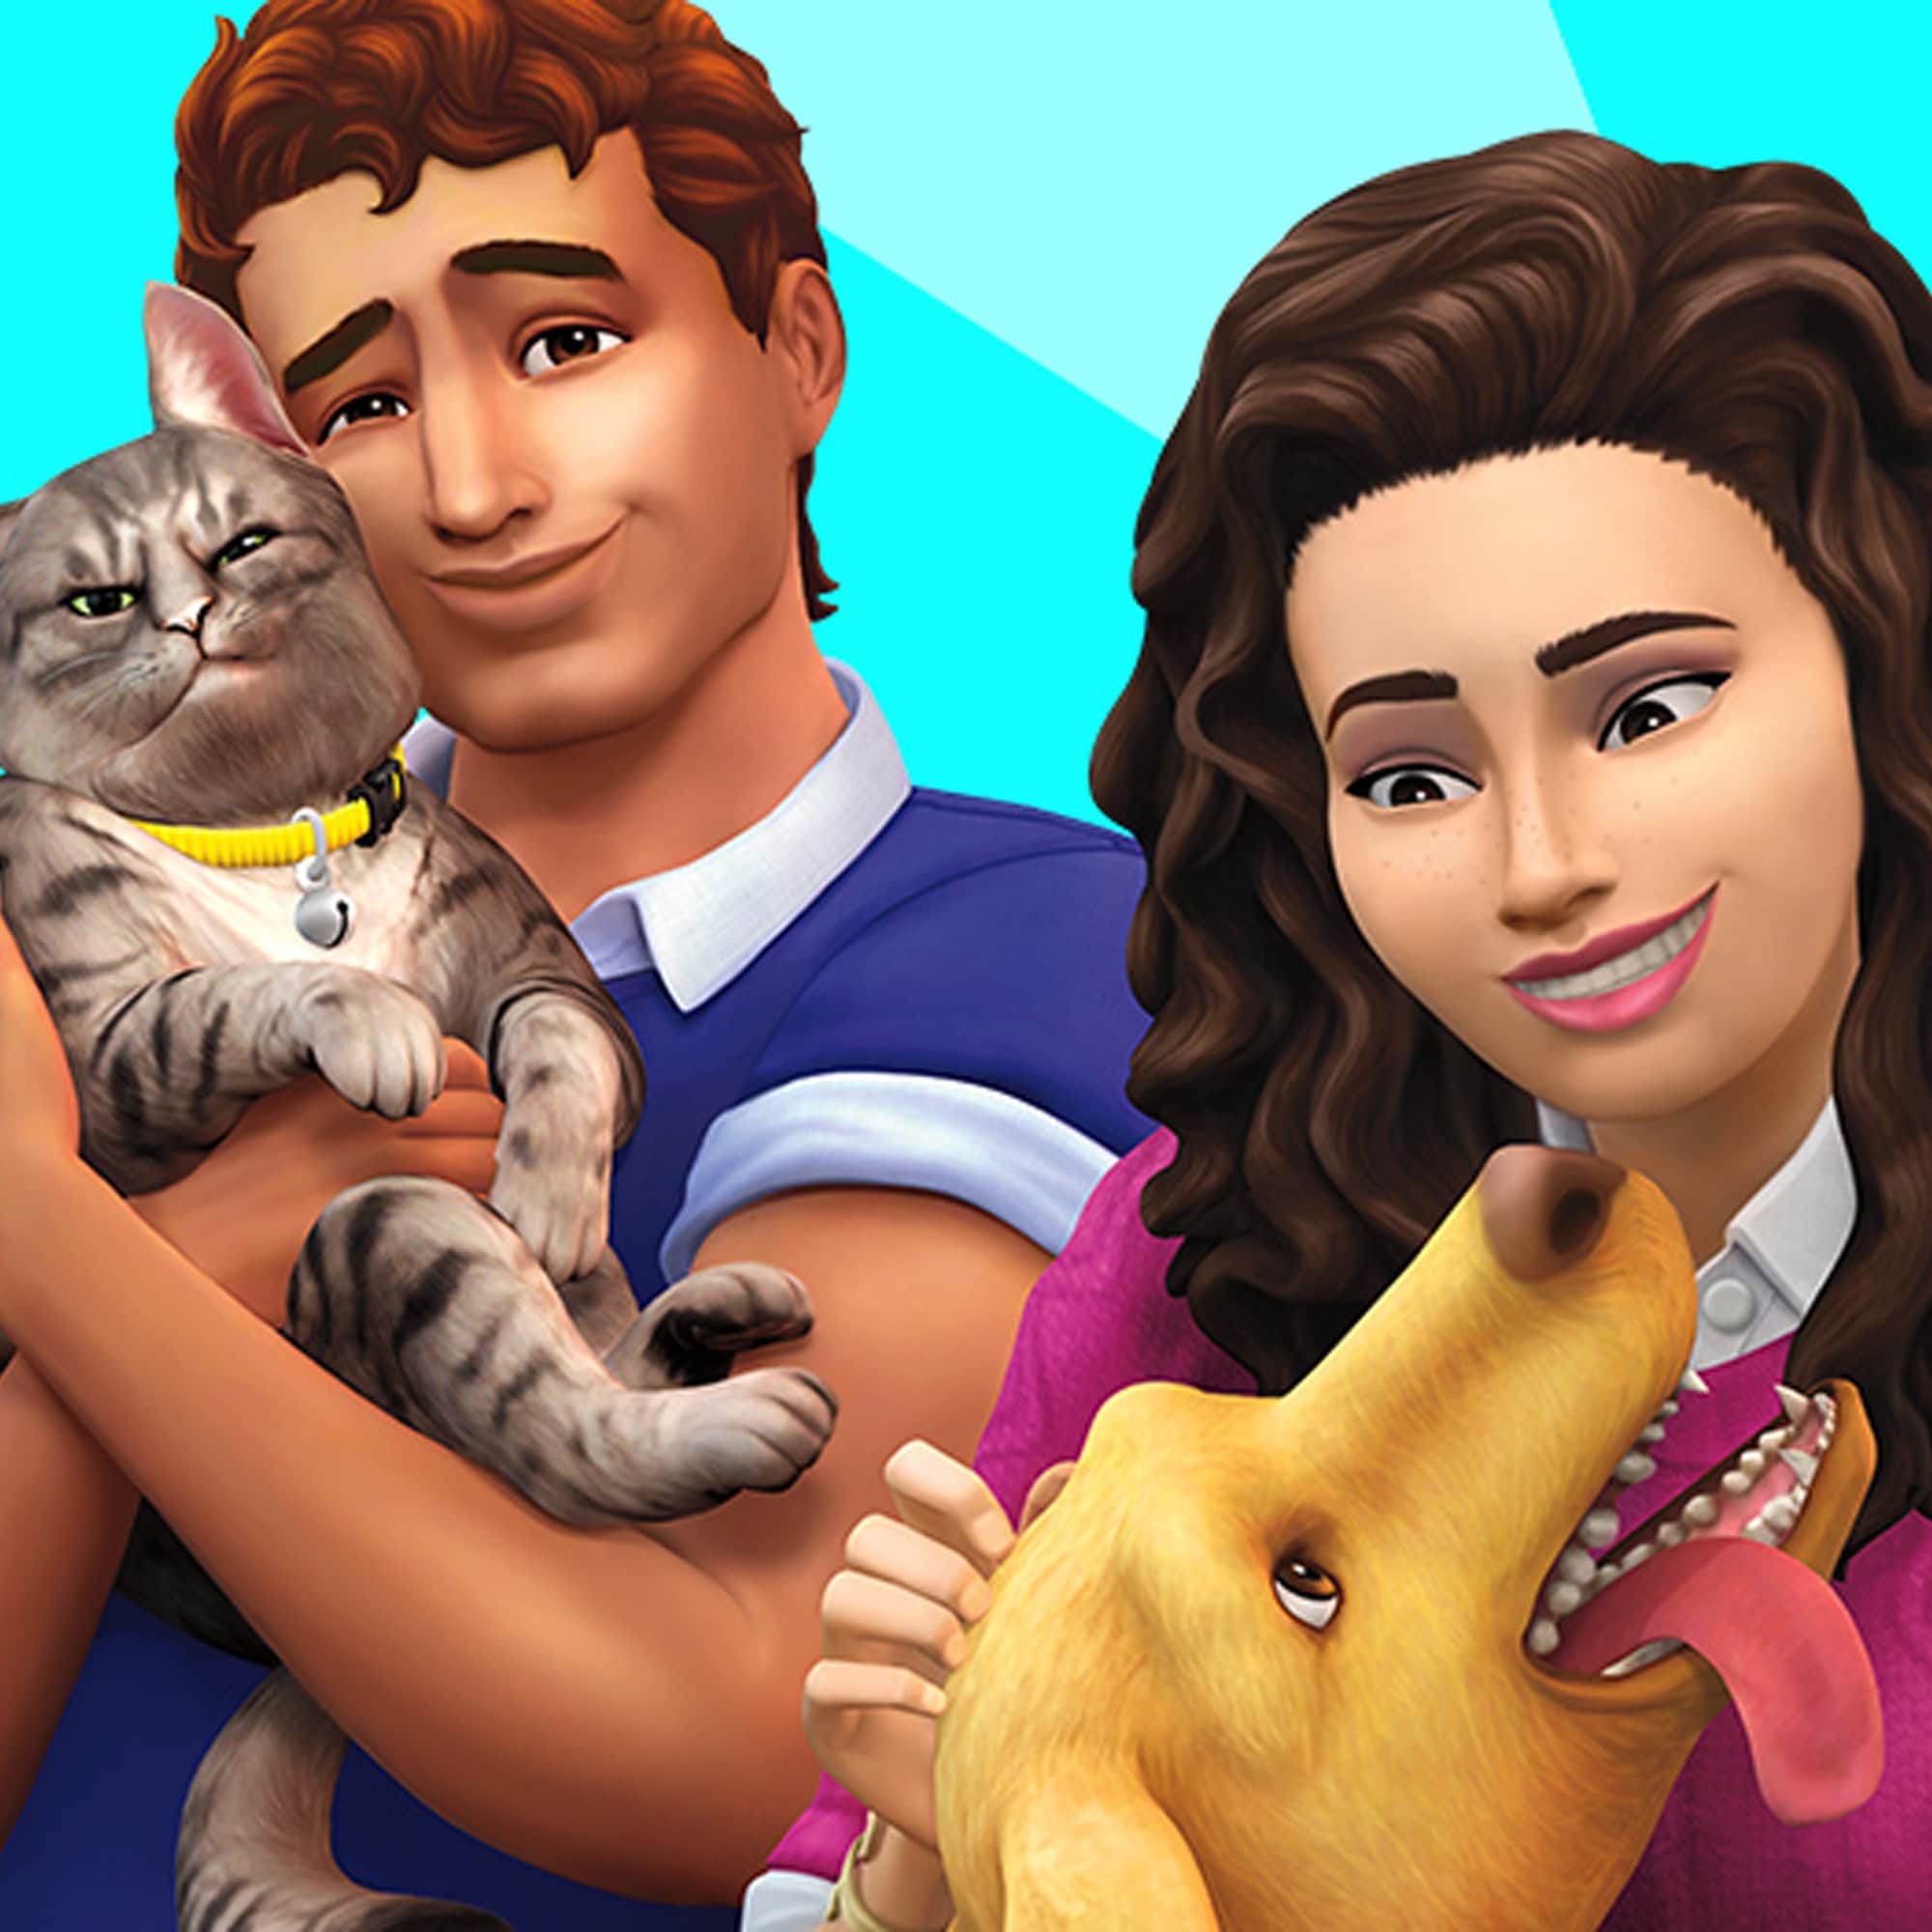 Play Sims 4 Free With Origin Game Time - GameSpot